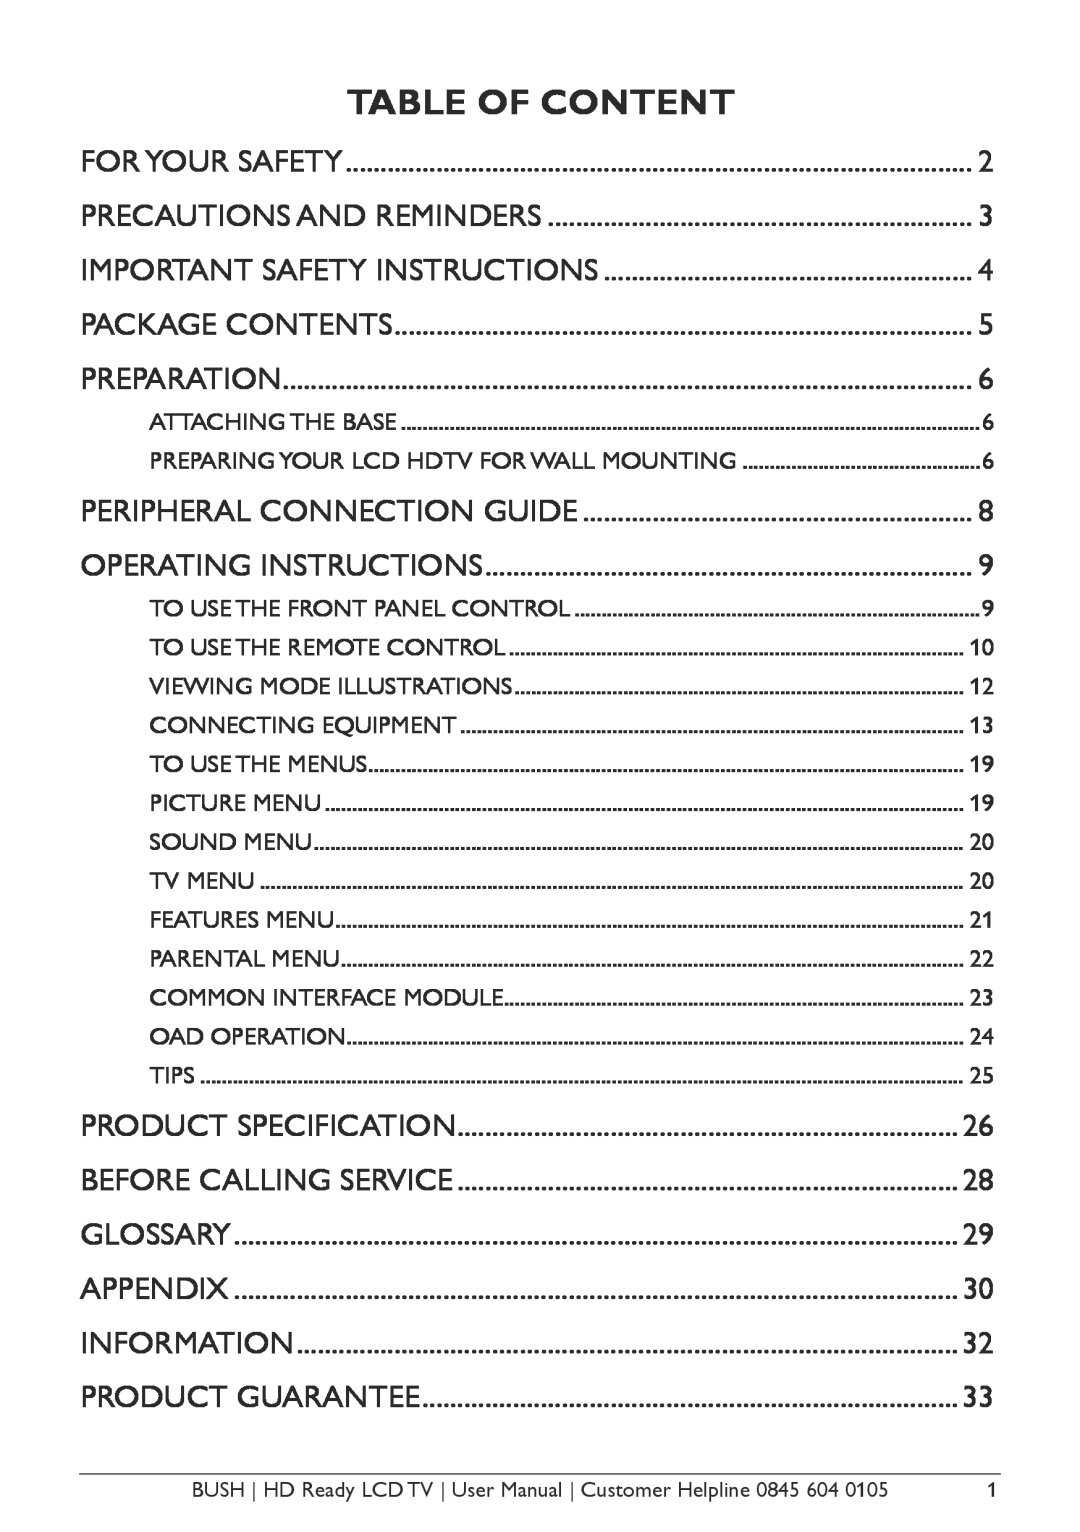 Bush A626N, A632N, Aseries, A642N instruction manual Peripheral Connection Guide, Table Of Content 